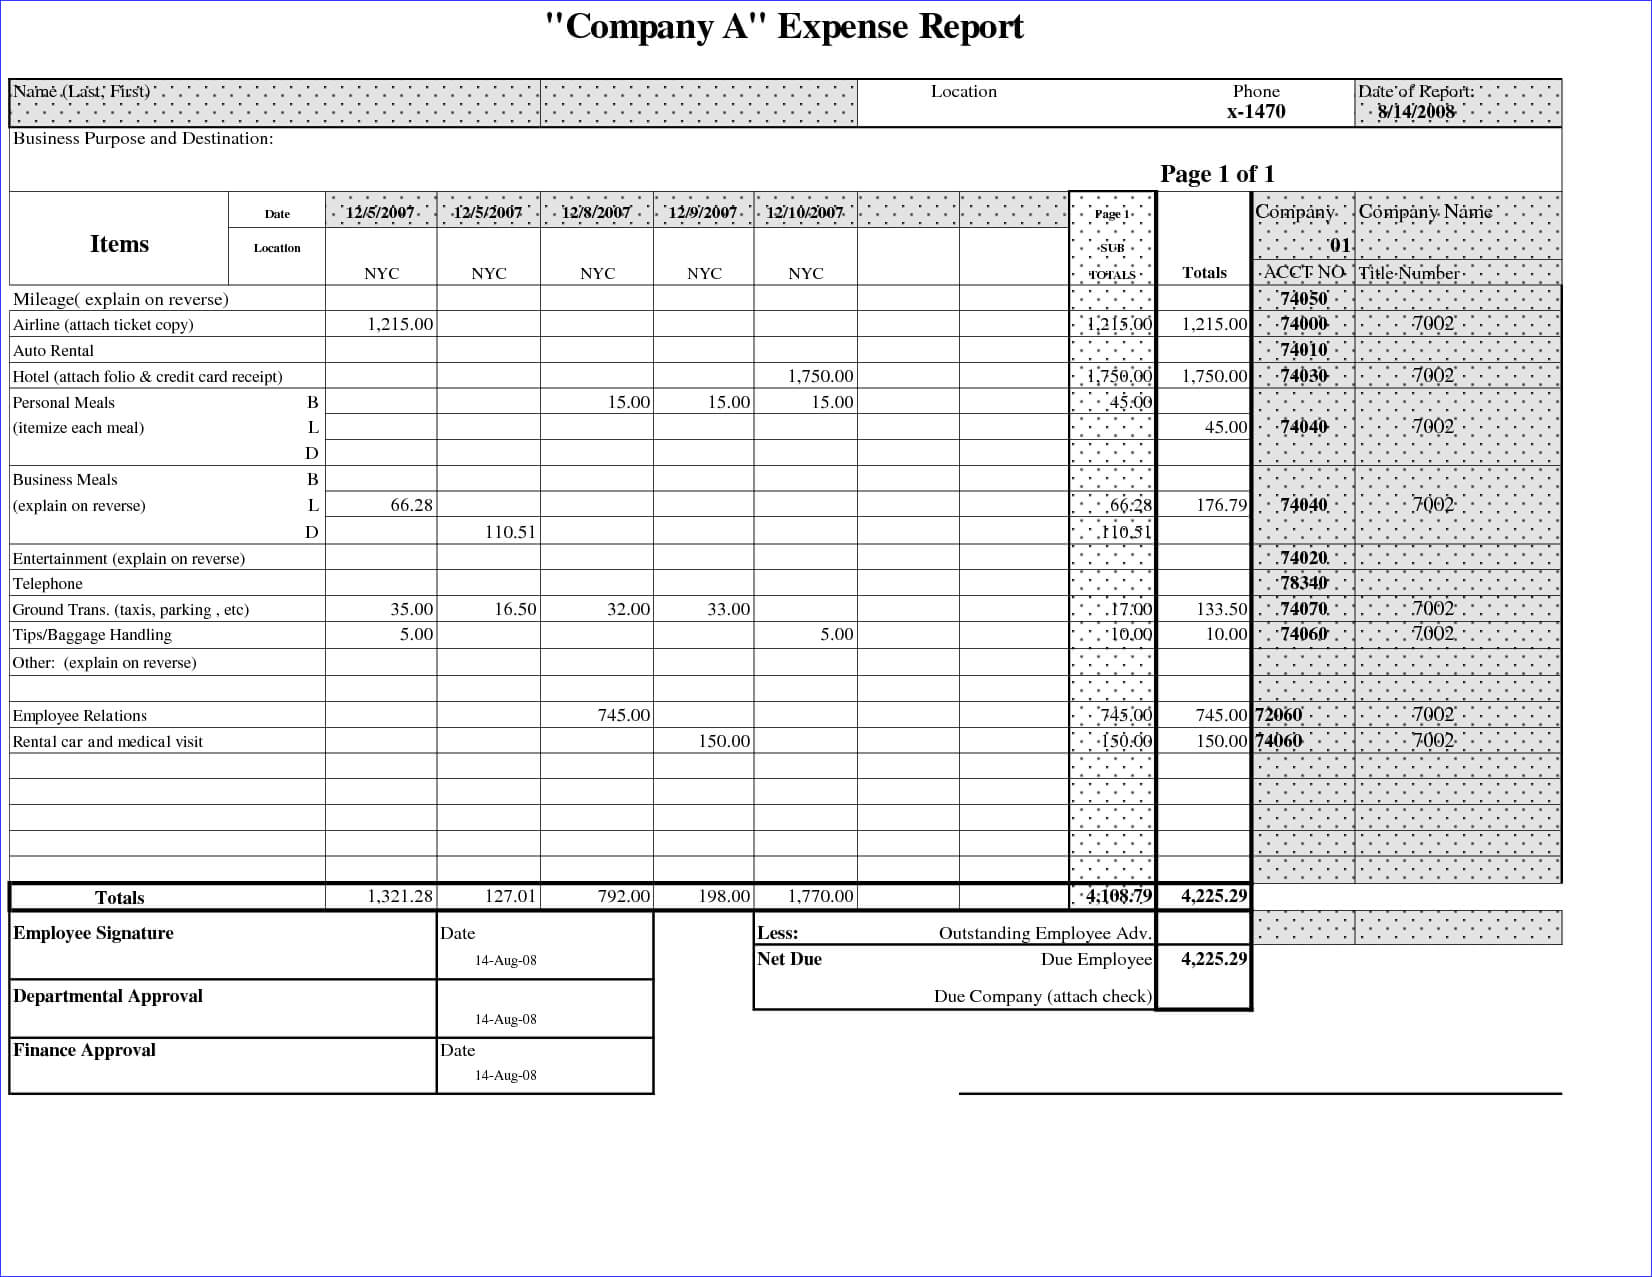 025 Business Expense Report Template Basic Company With In Company Expense Report Template